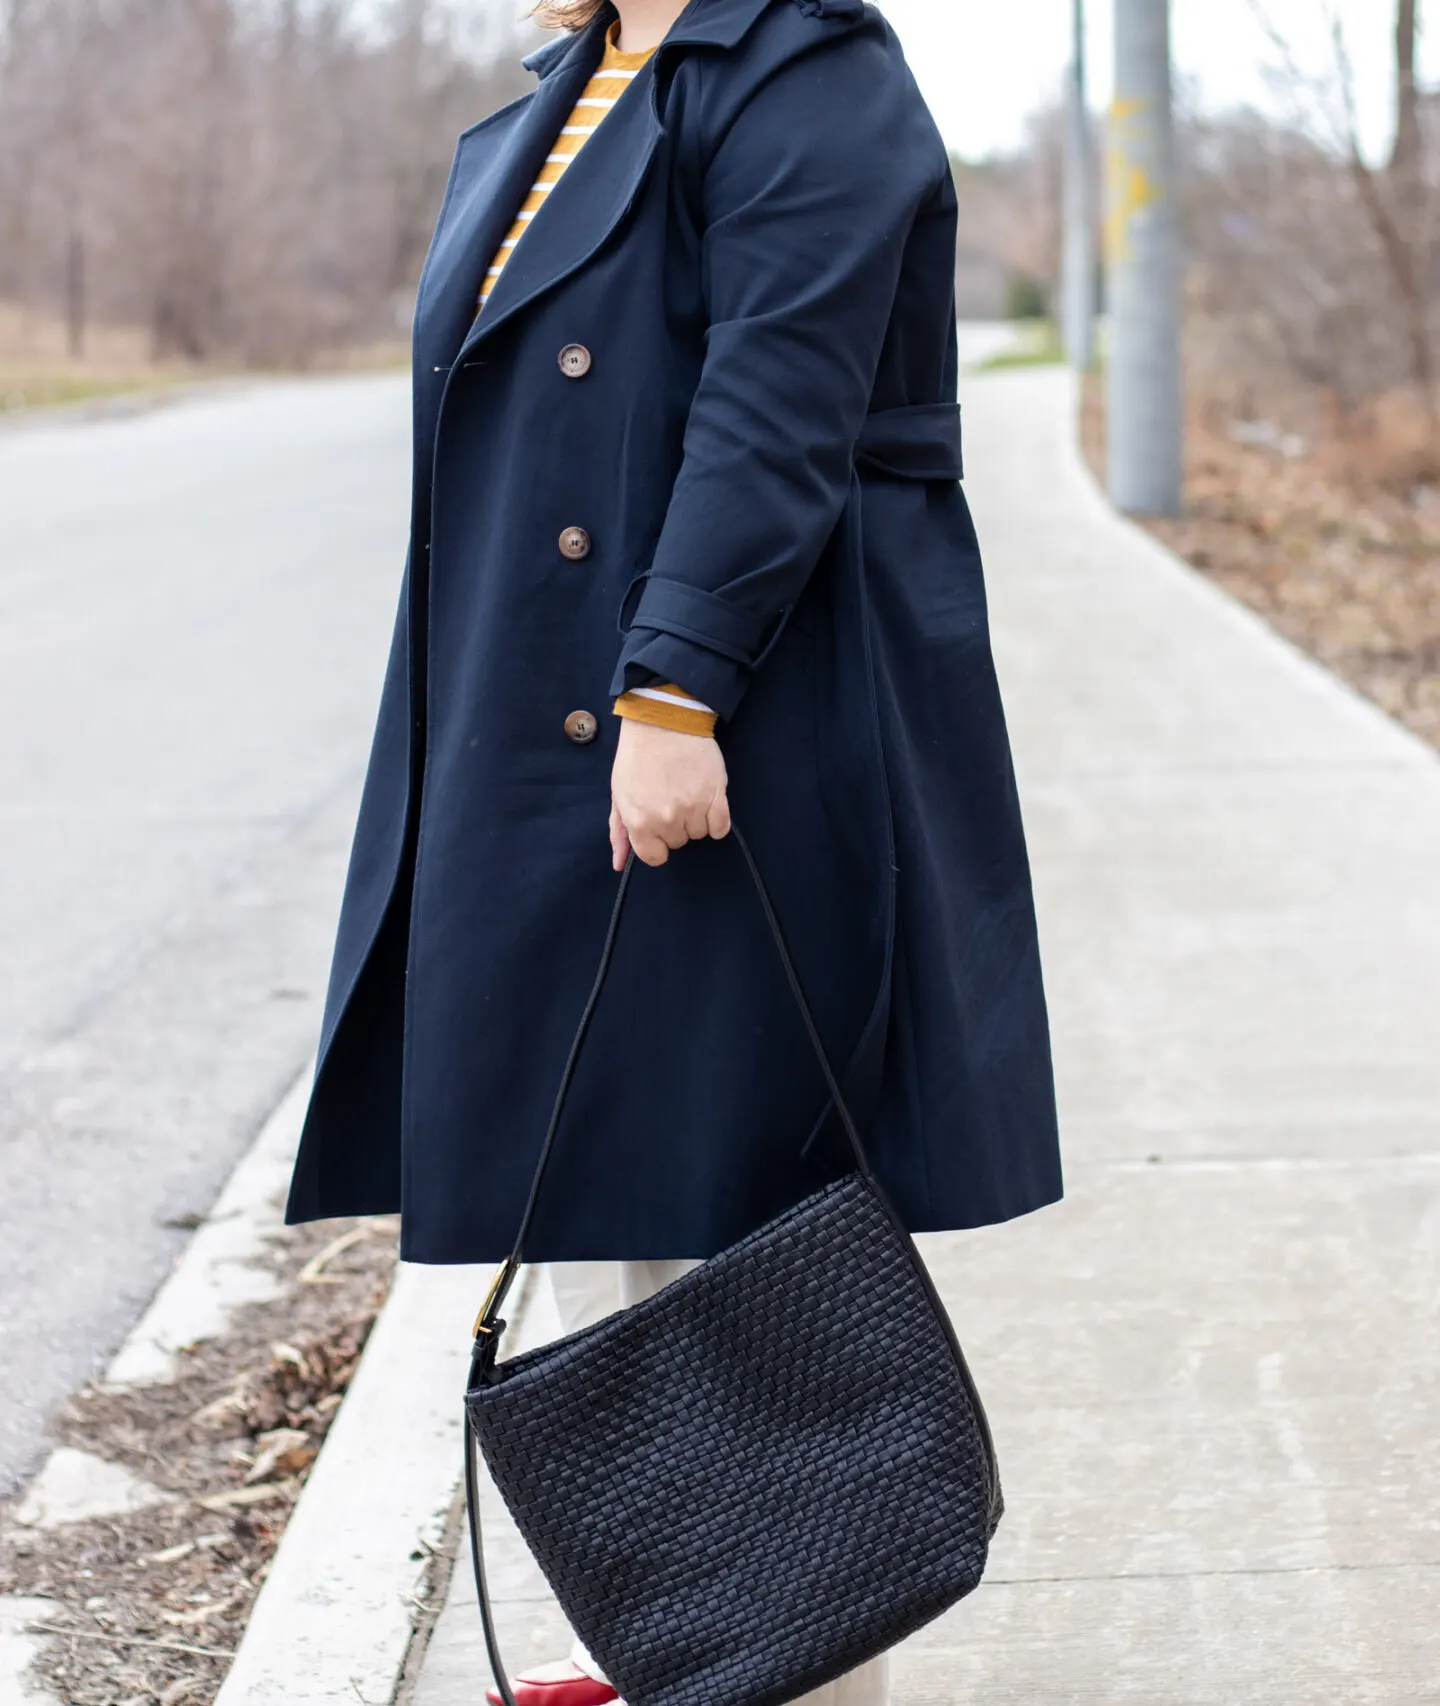 sezane trench coat outfit